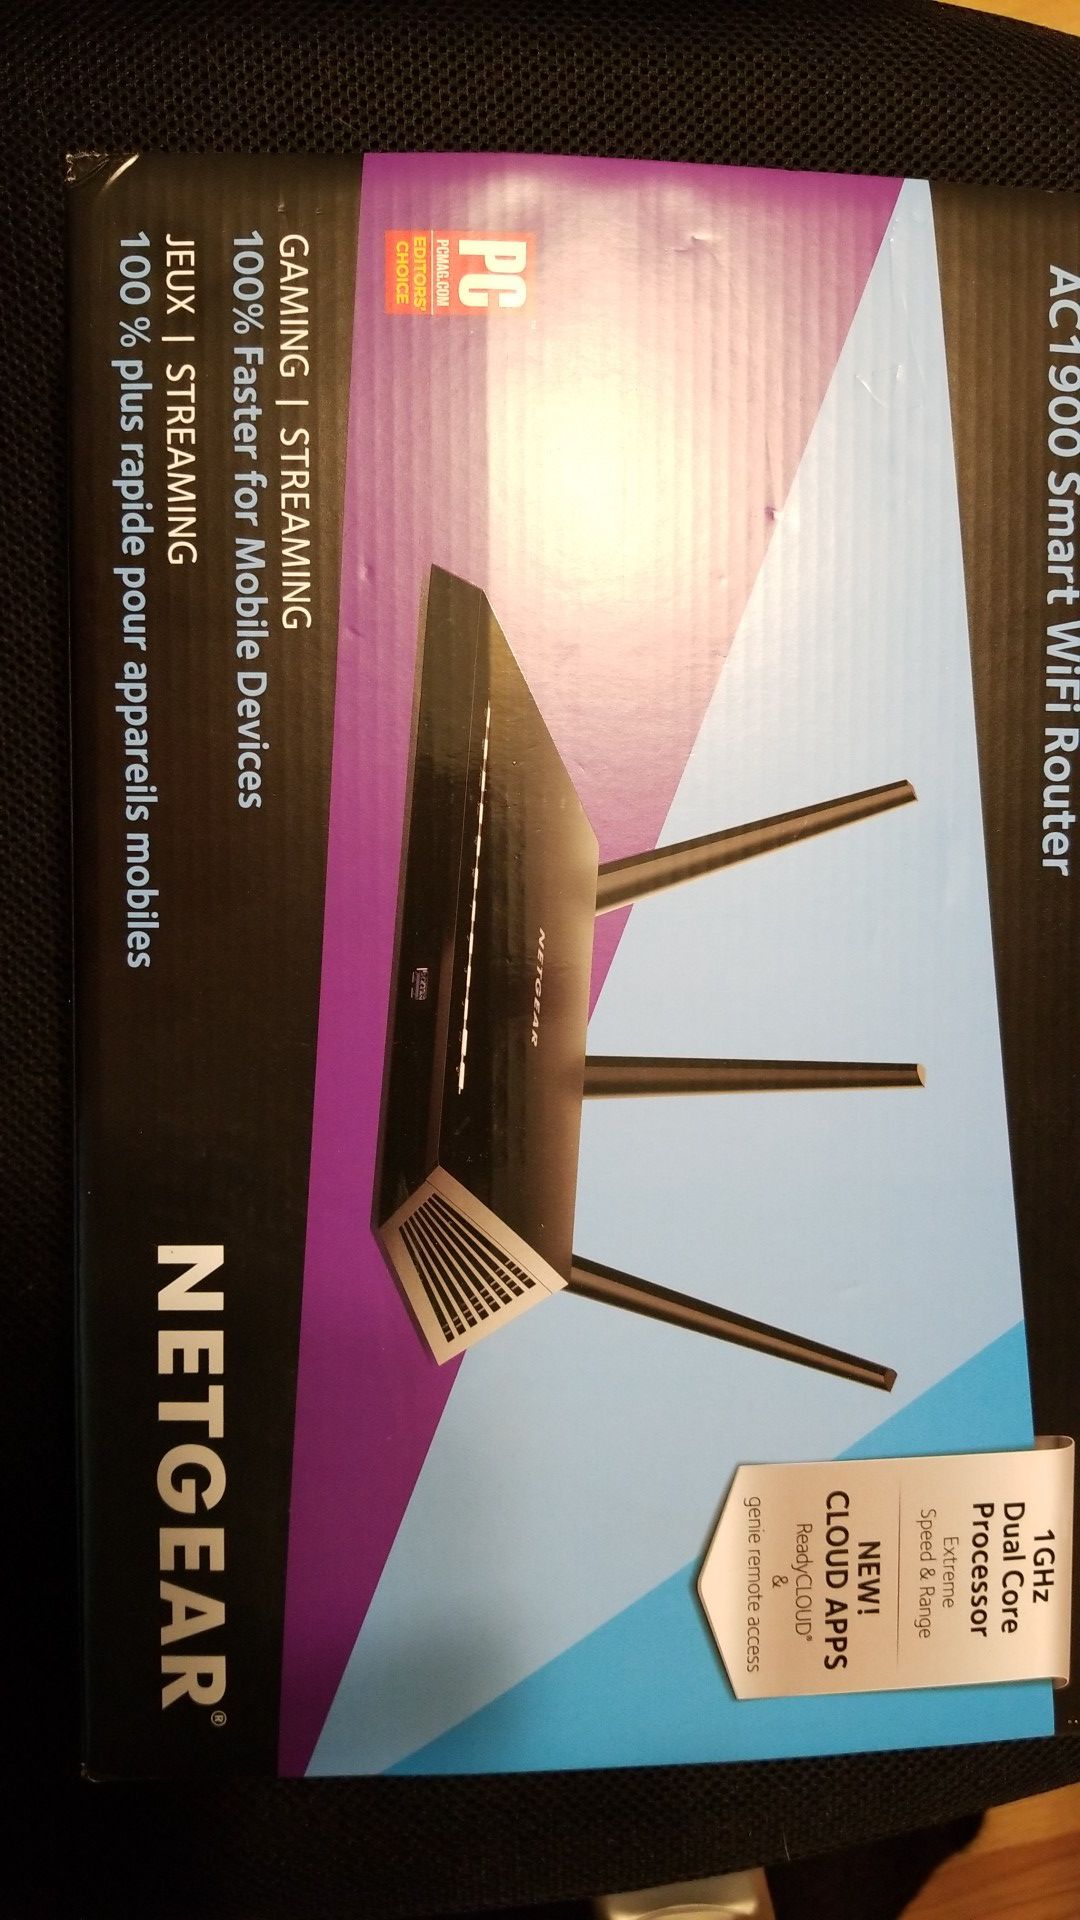 Netgear router Gaming Syreaming